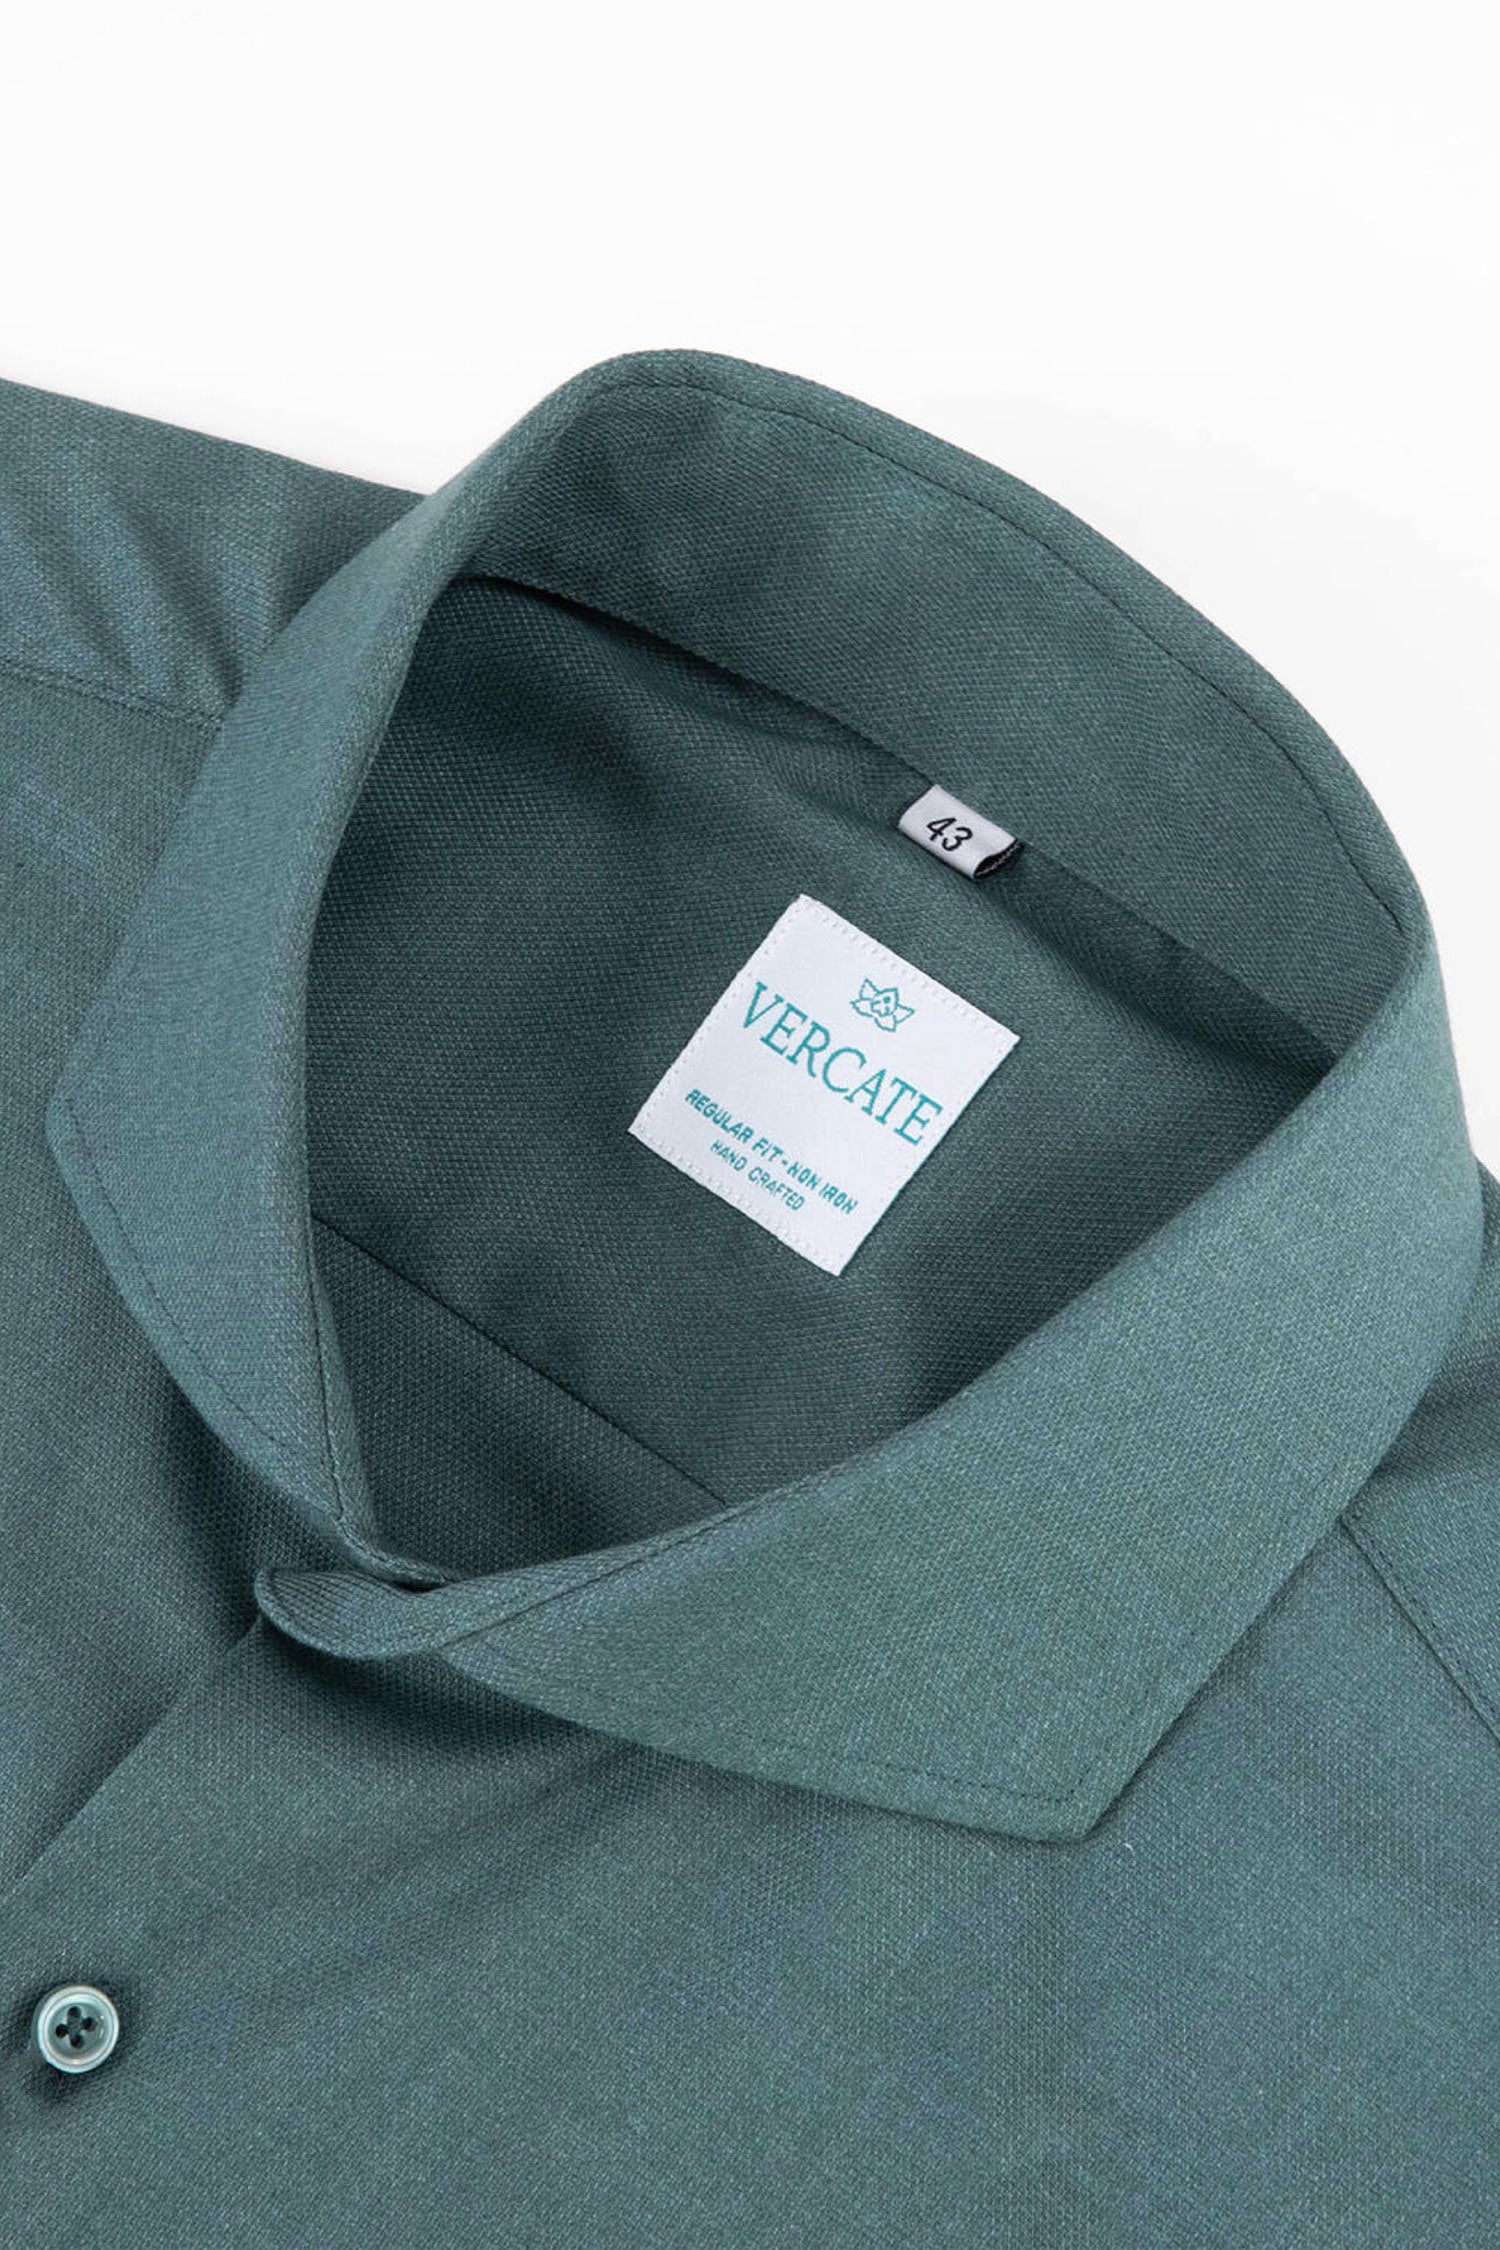 Wrinkle Resistant Shirt - Green Bamboo